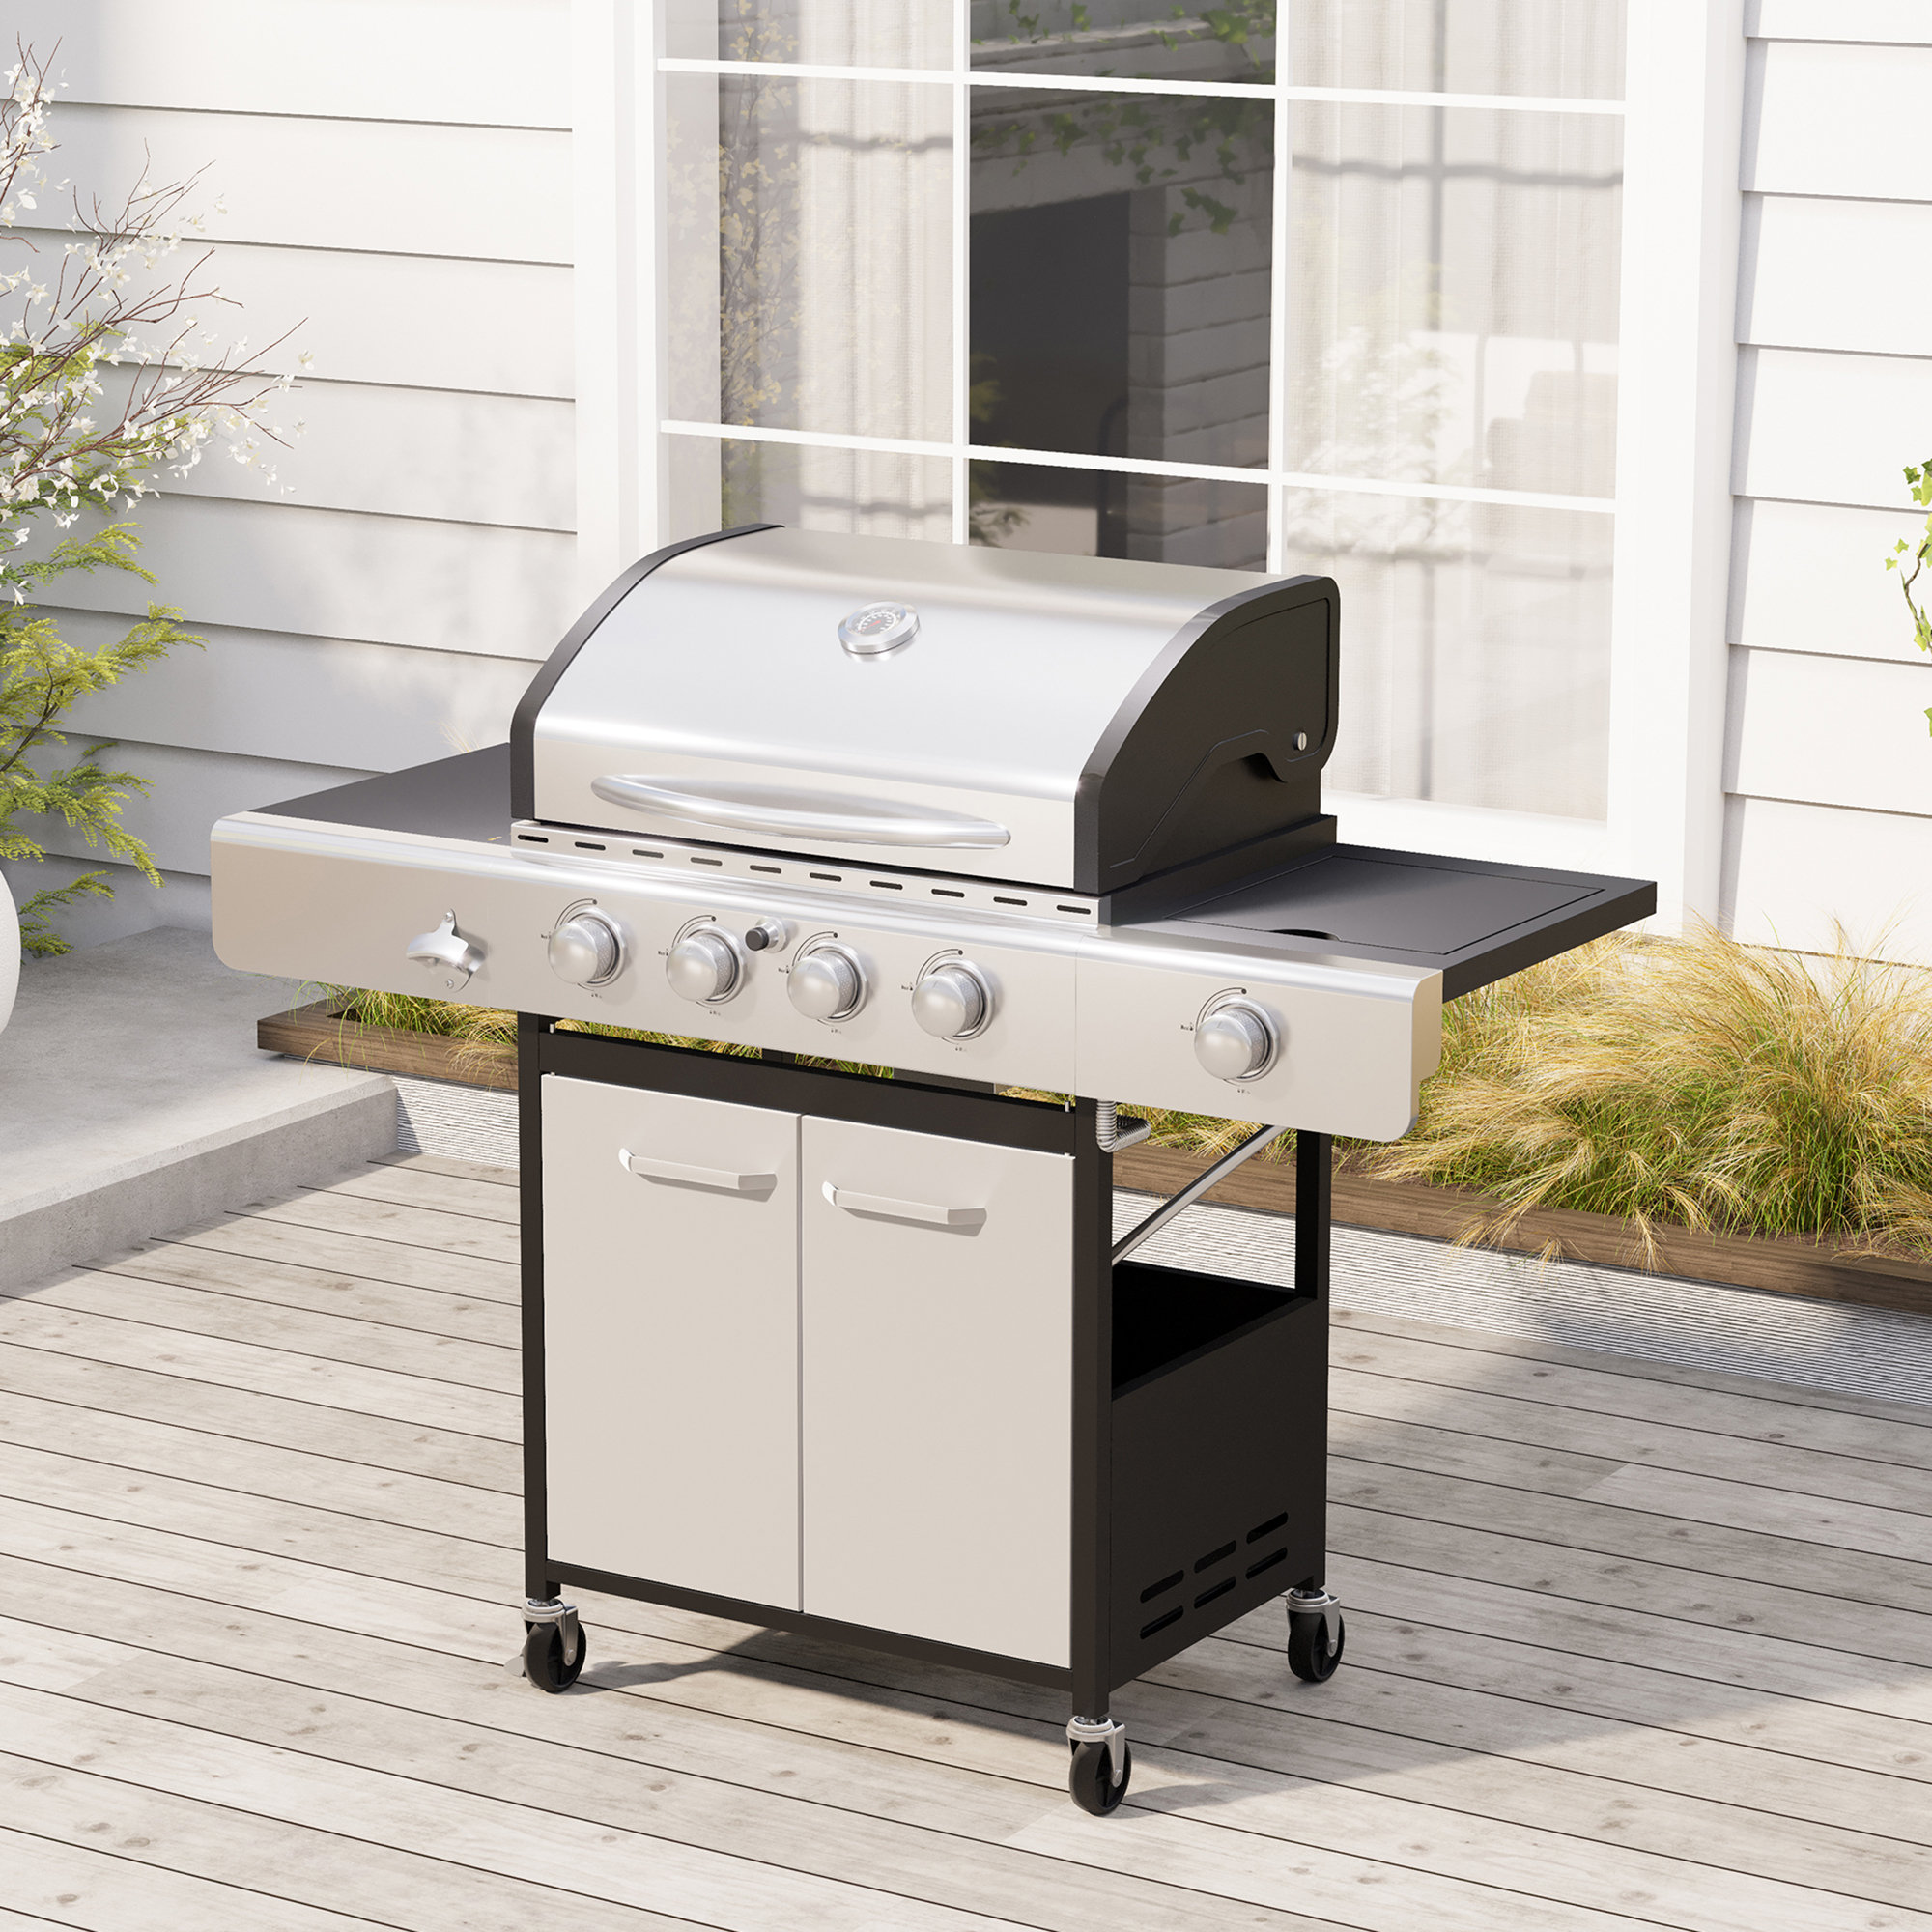 Arlmont & Co. Cledith - Burner Countertop Liquid Propane Gas Grill with Side Burner and Cabinet & Reviews | Wayfair